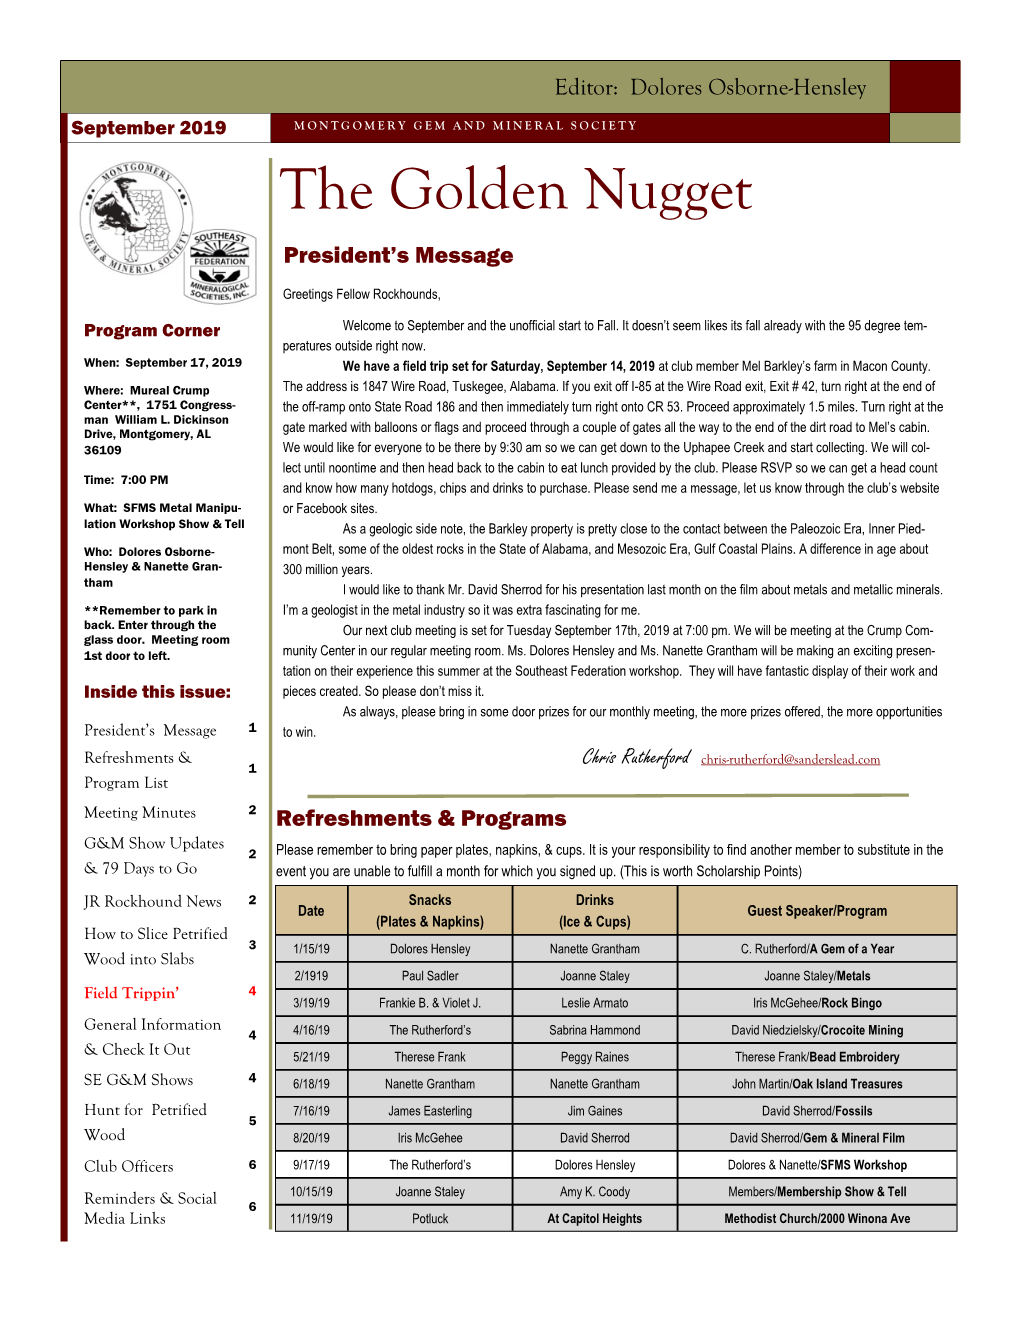 The Golden Nugget President’S Message